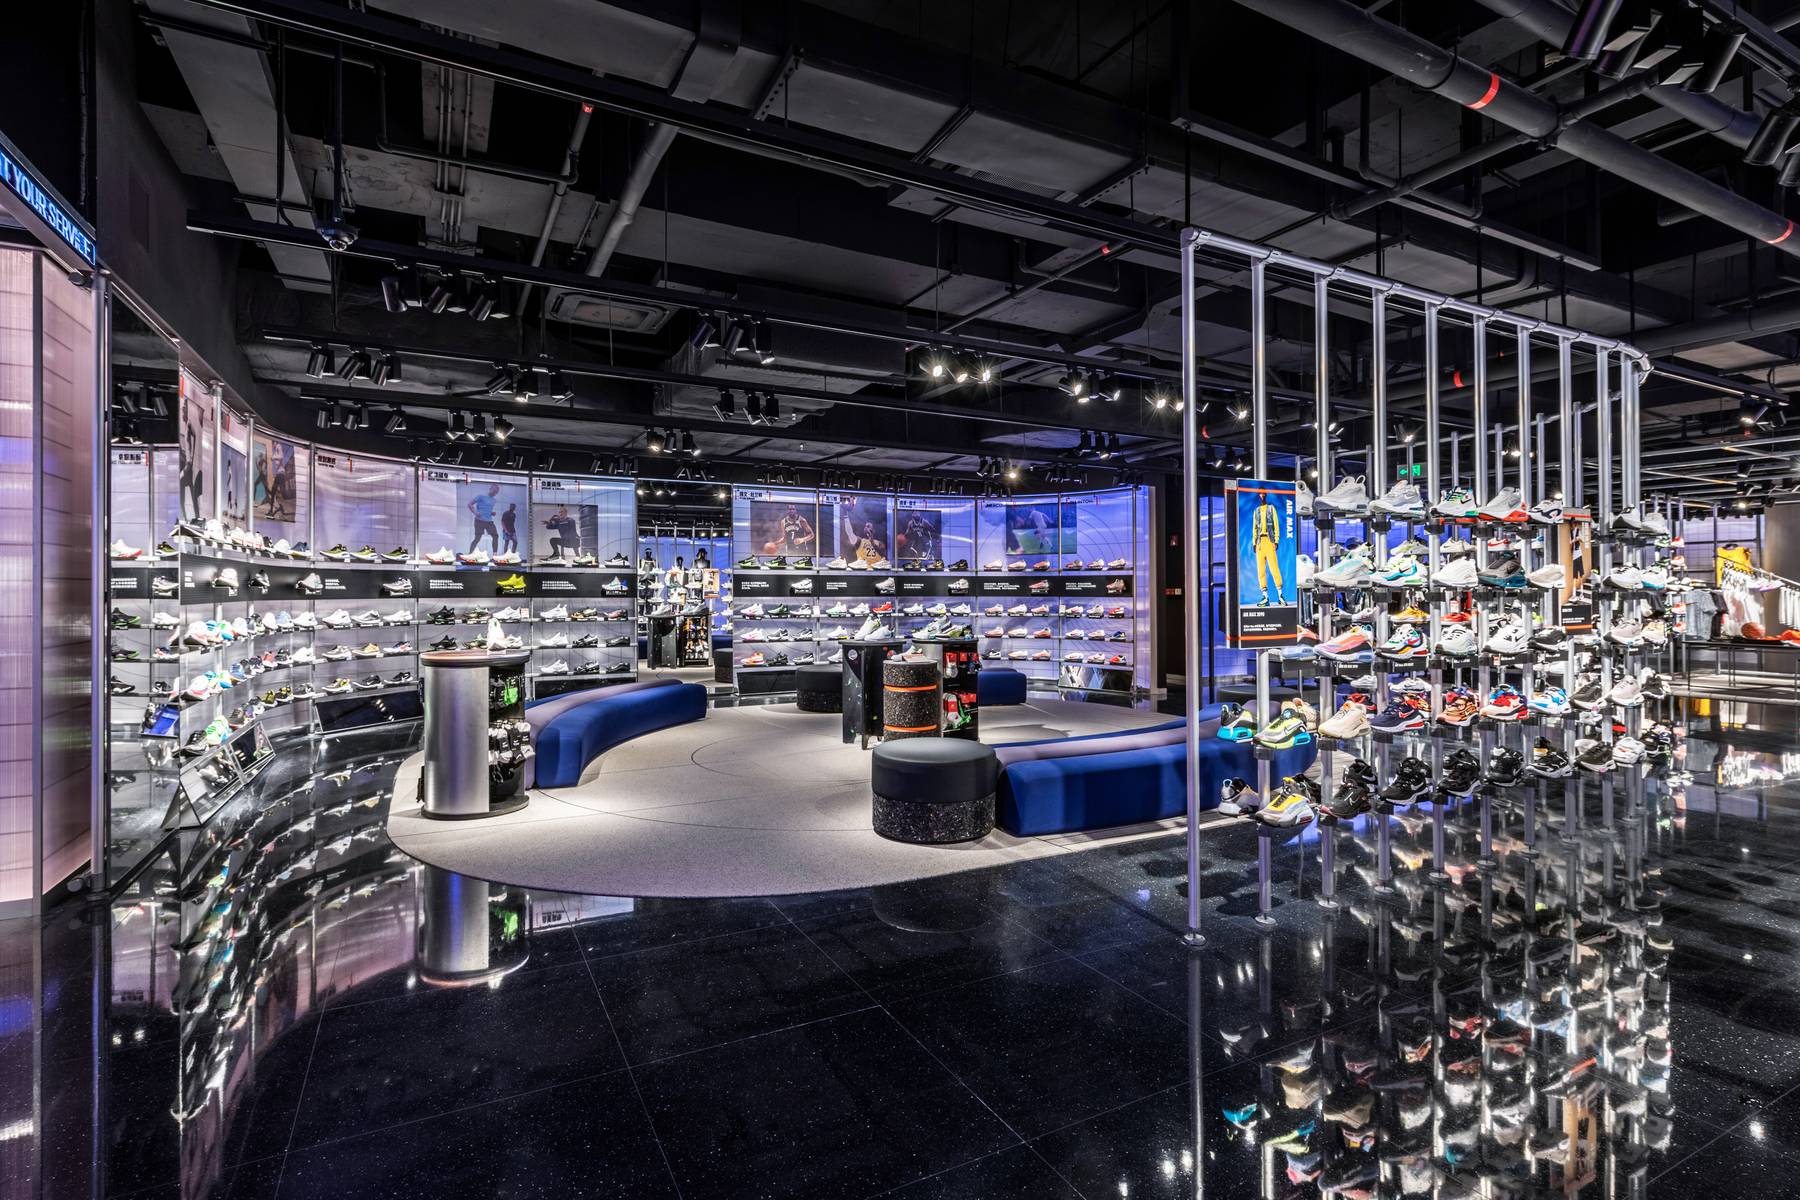 Nike's latest retail concept in Guangzhou, China